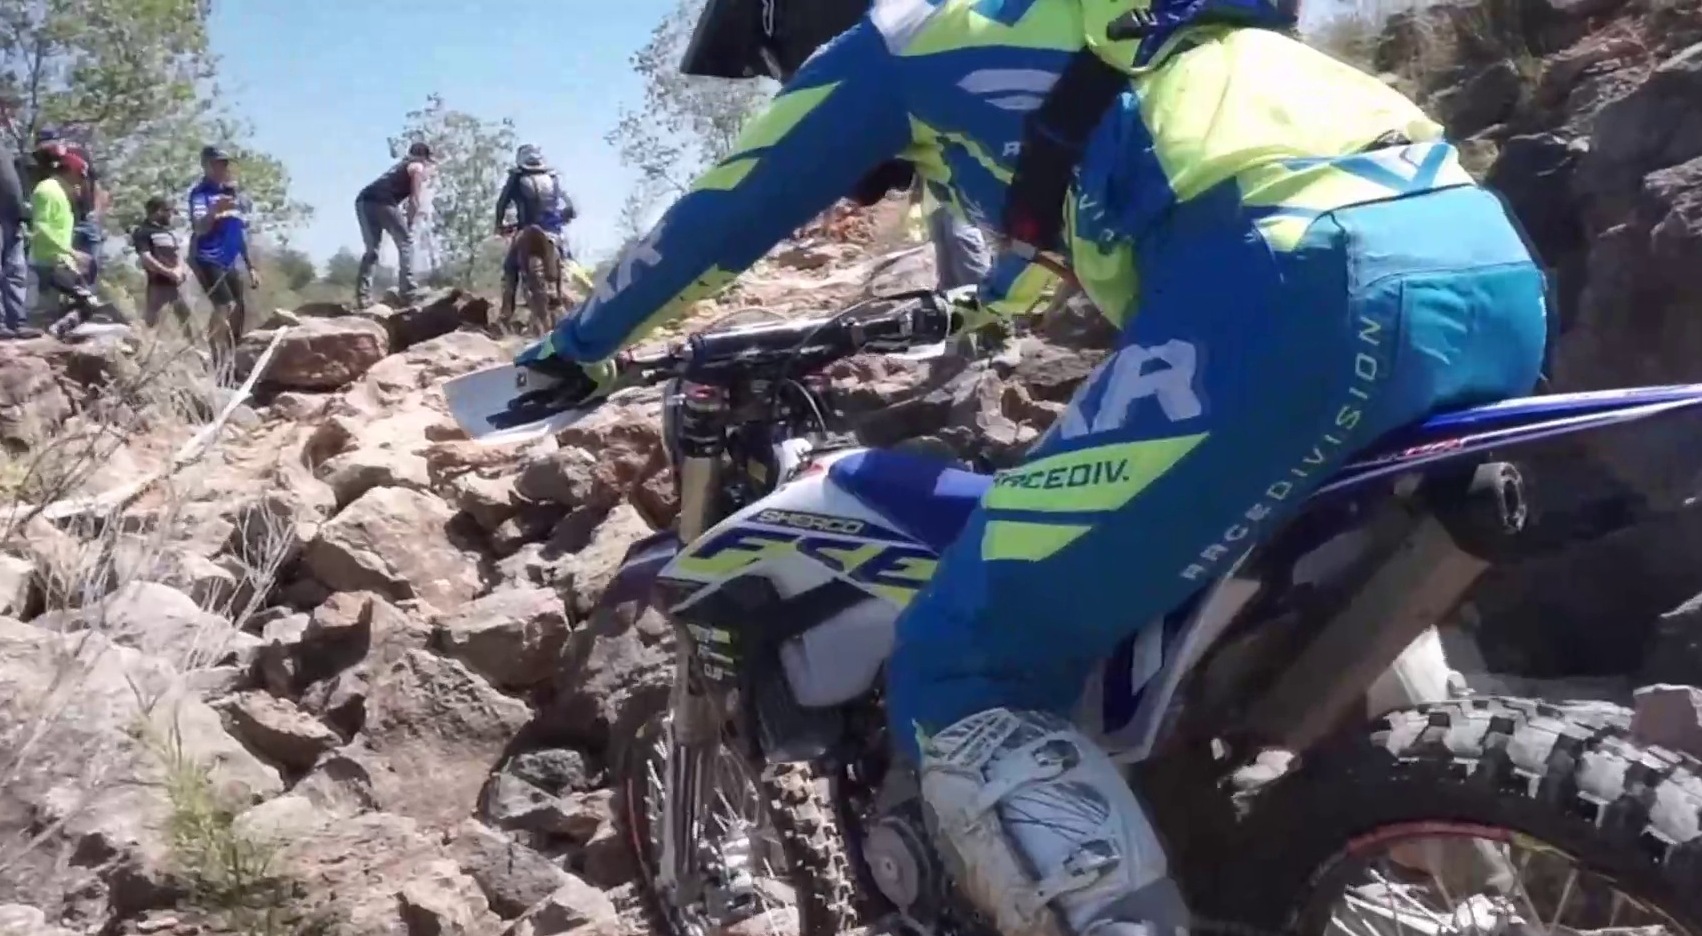 2020 rev limiter sherco 2020 AMA East series video offiical video